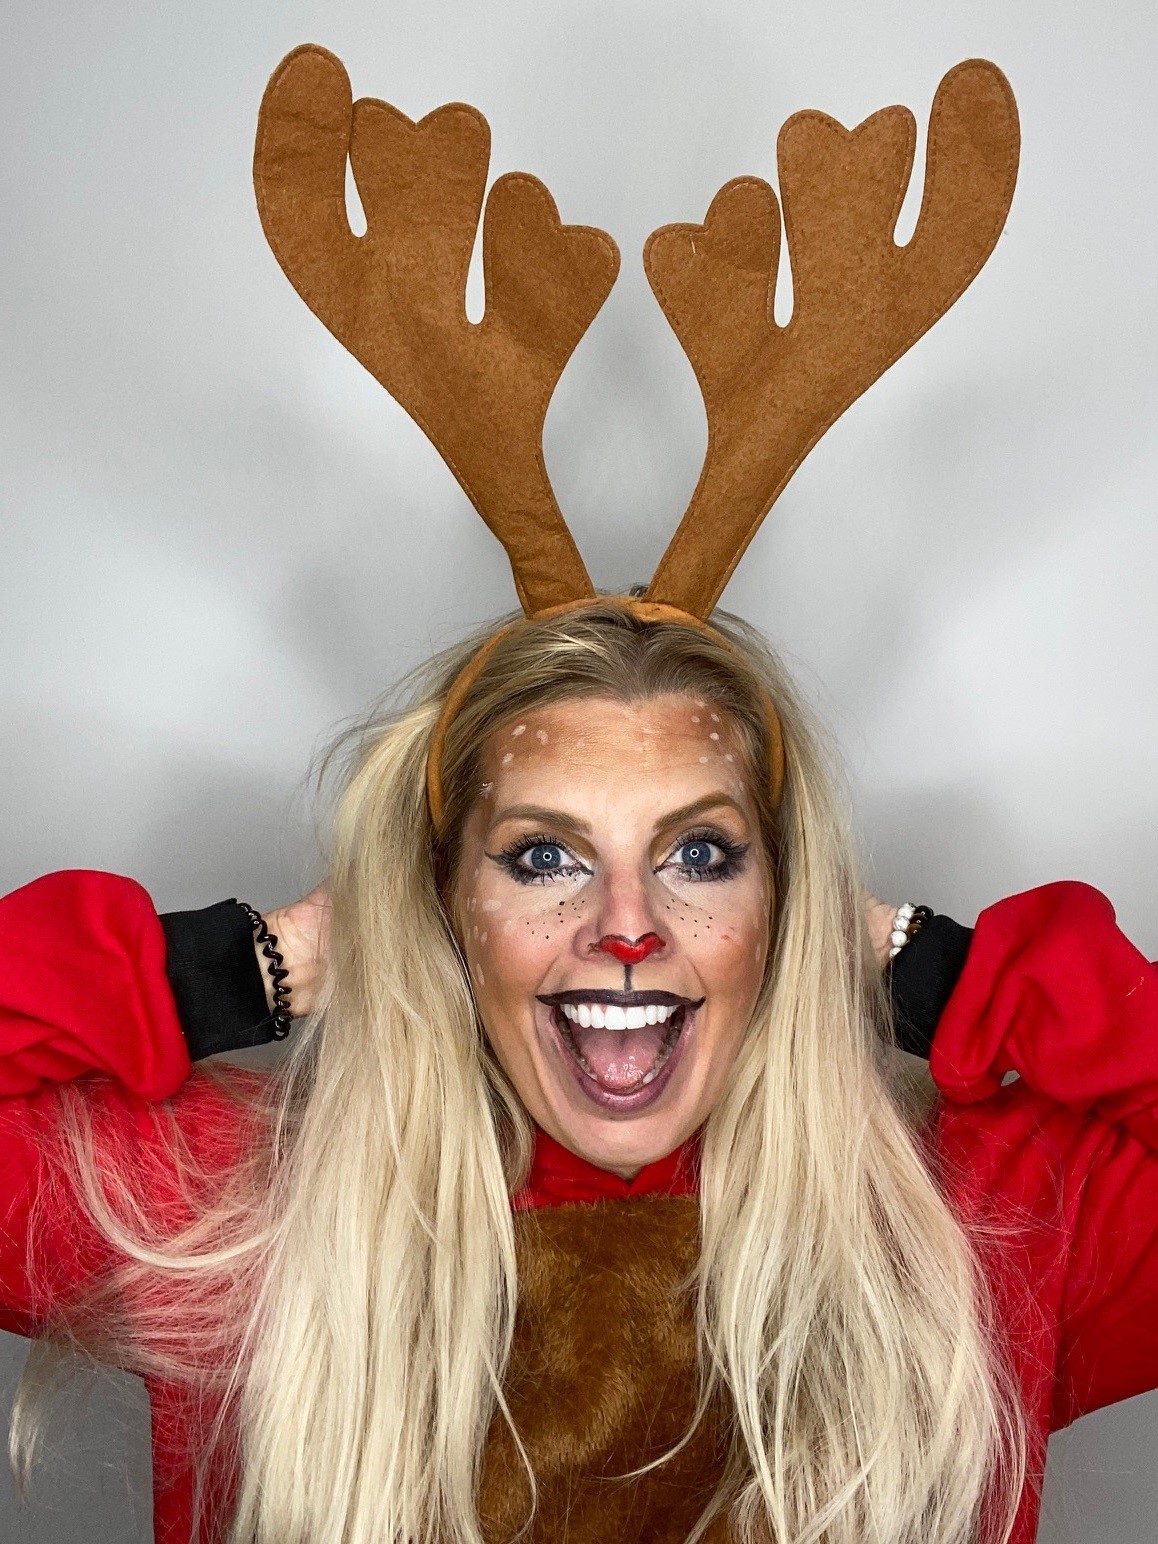 Young white woman with long blond hair wearing reindeer antlers and face make up, smiling with hands behind her head